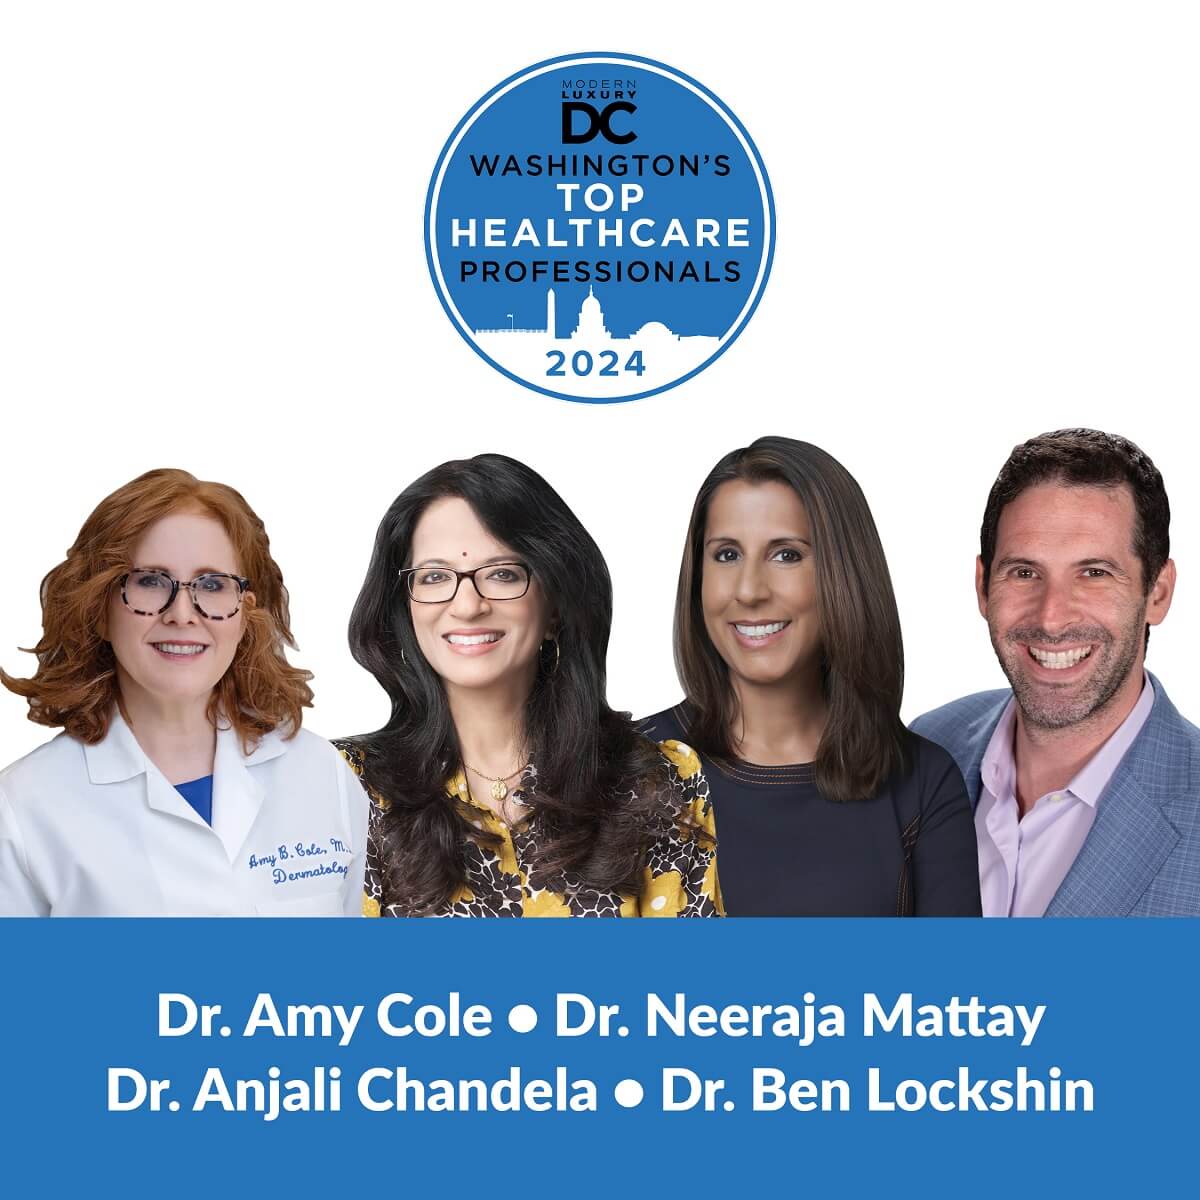 Anjali Chandela, MD, Neeraja Mattay, MD, Amy Cole, MD, and Ben Lockshin, MD recognized as Castle Connolly Top Doctors for 2024.